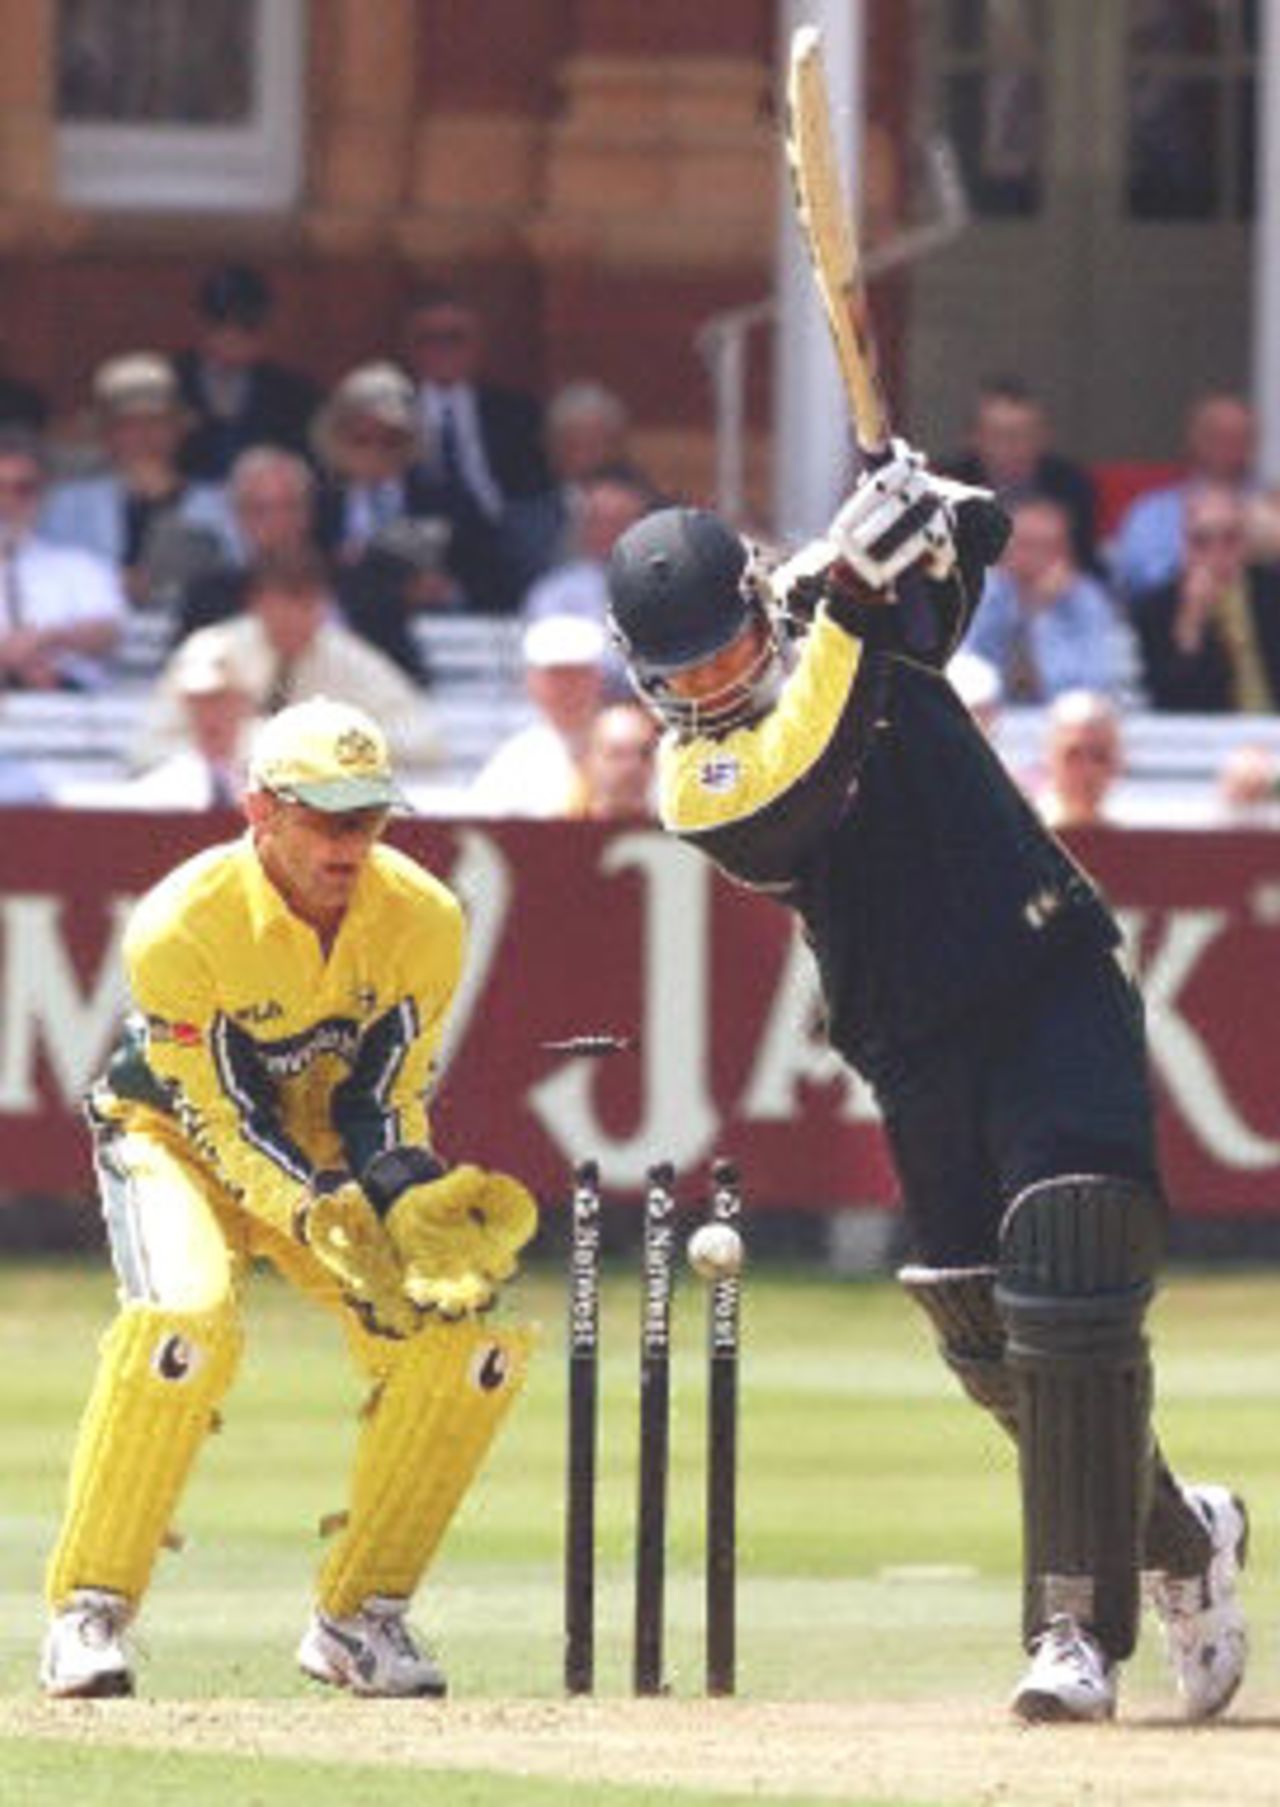 Azhar Mahmood plays all around a Shane Warne delivery and is bowled as Adam Gilchrist looks on, final ODI at Lords, 23 June 2001.